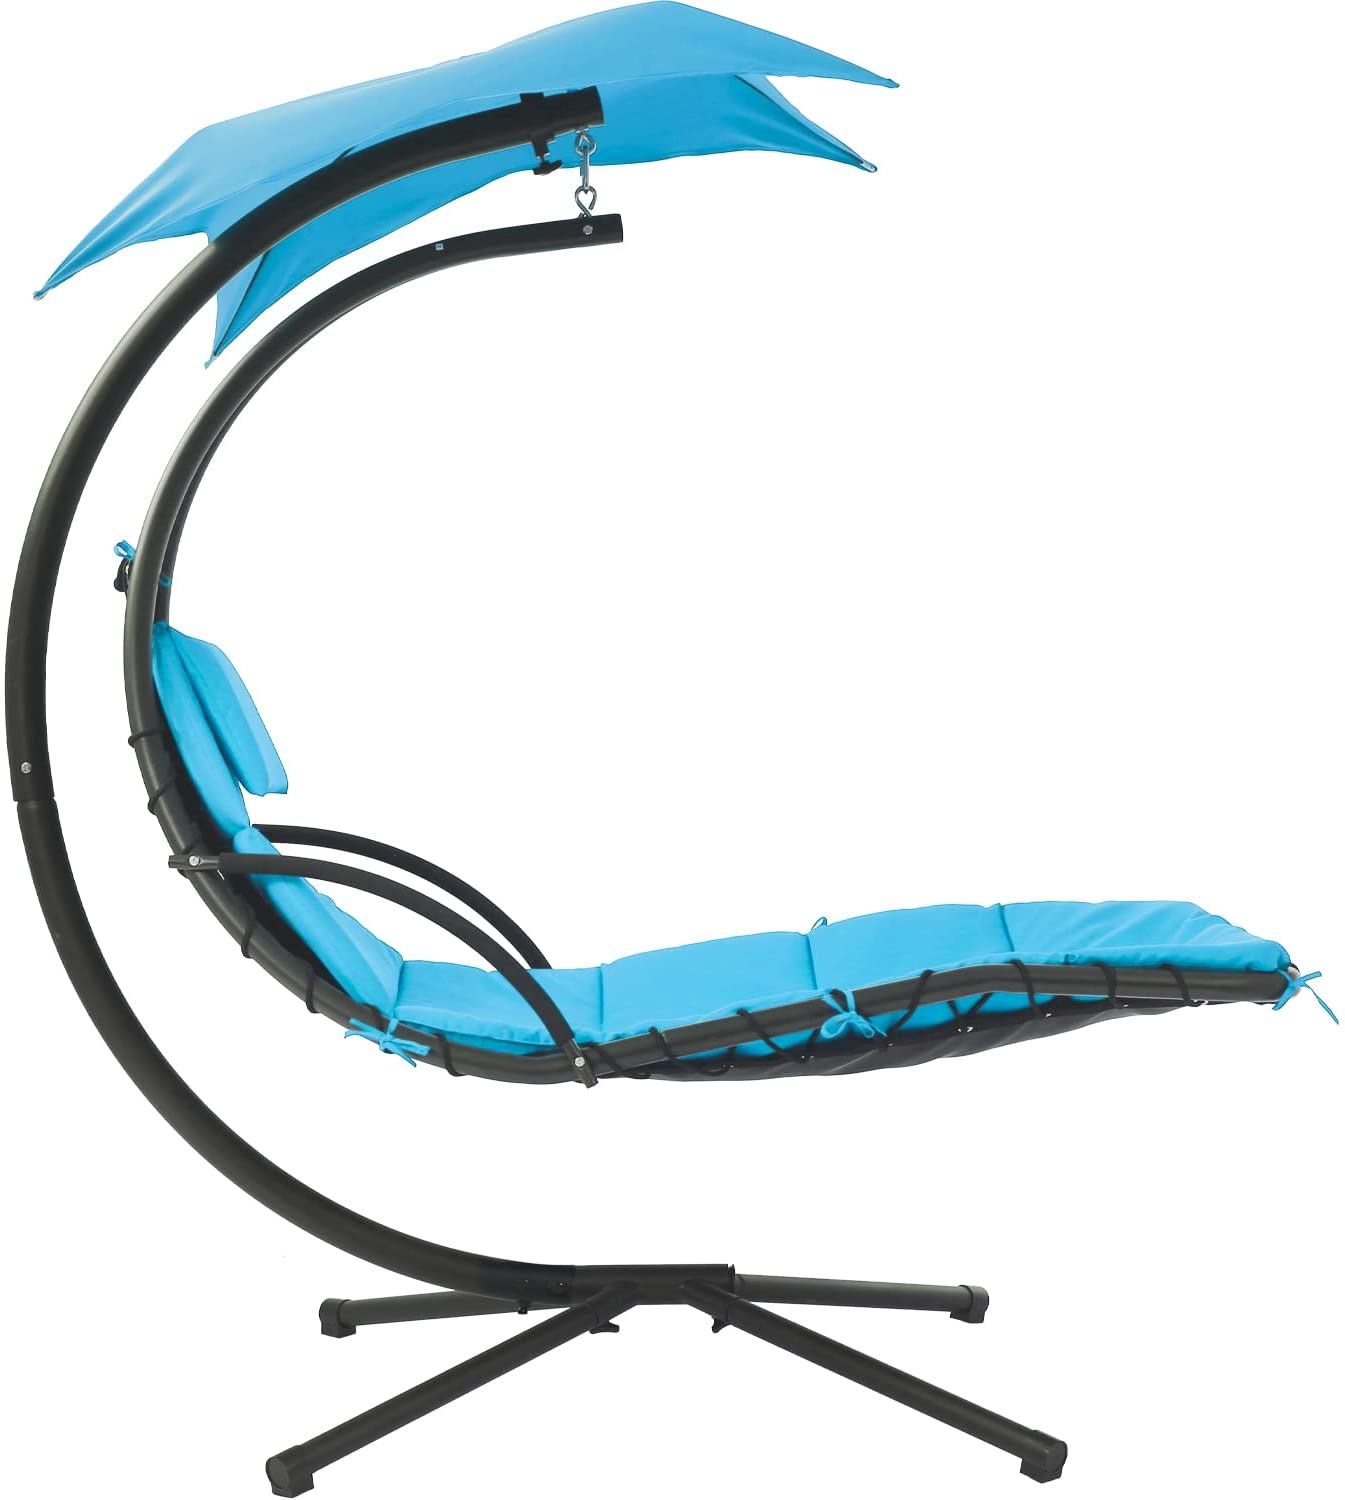 YRLLENSDAN Hanging Curved Chaise Lounge Chair Swing, Outdoor Lounge Swing with Canopy Floating Hammock Swing Patio w/ Built-in Pillow for Beach Backyard, Blue - image 1 of 7